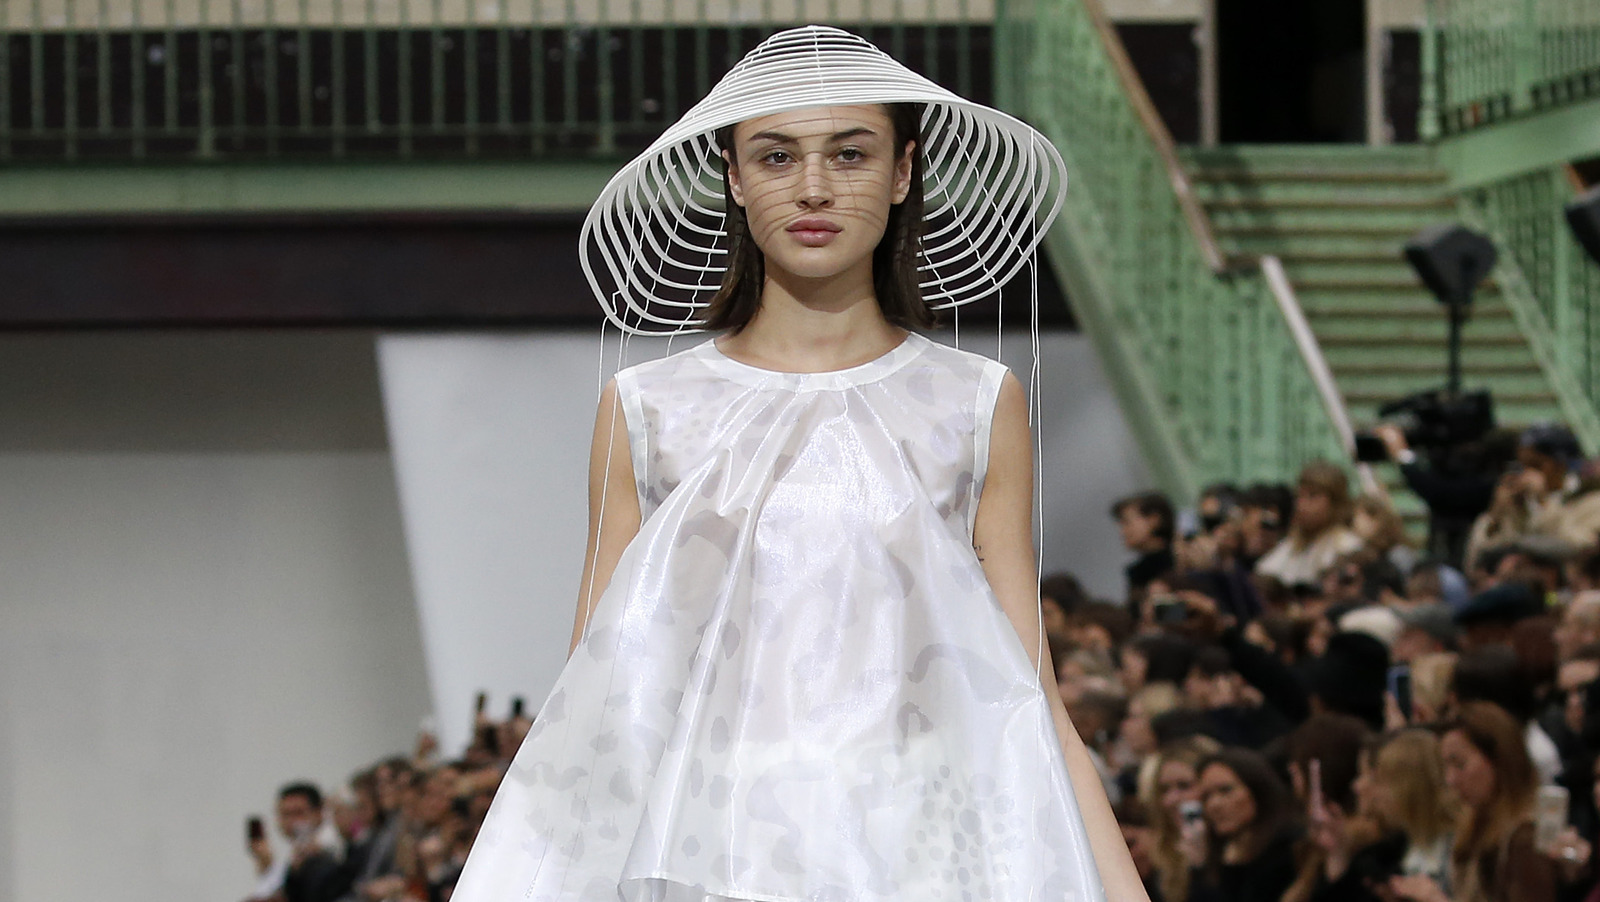 What Do Architectural Silhouettes Mean In Fashion?